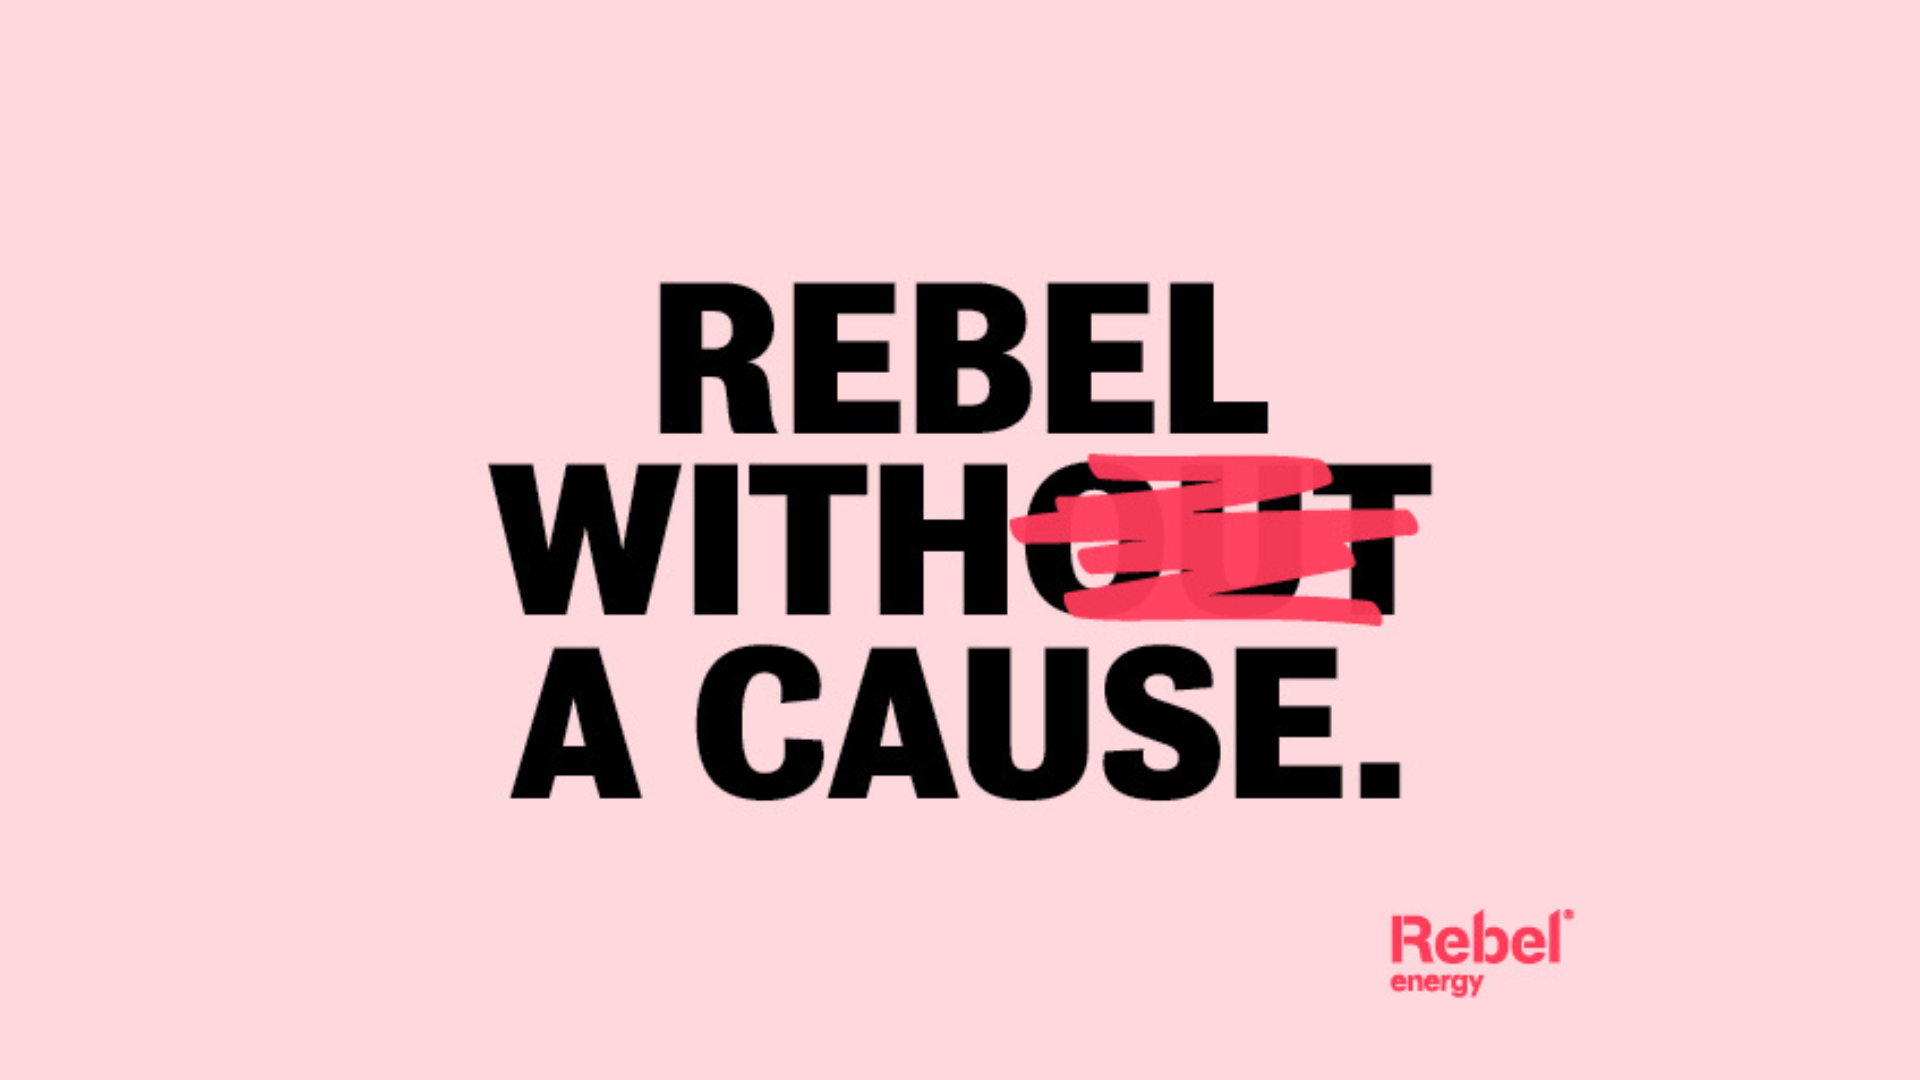 The Rebel energy slogan, rebel with a cause